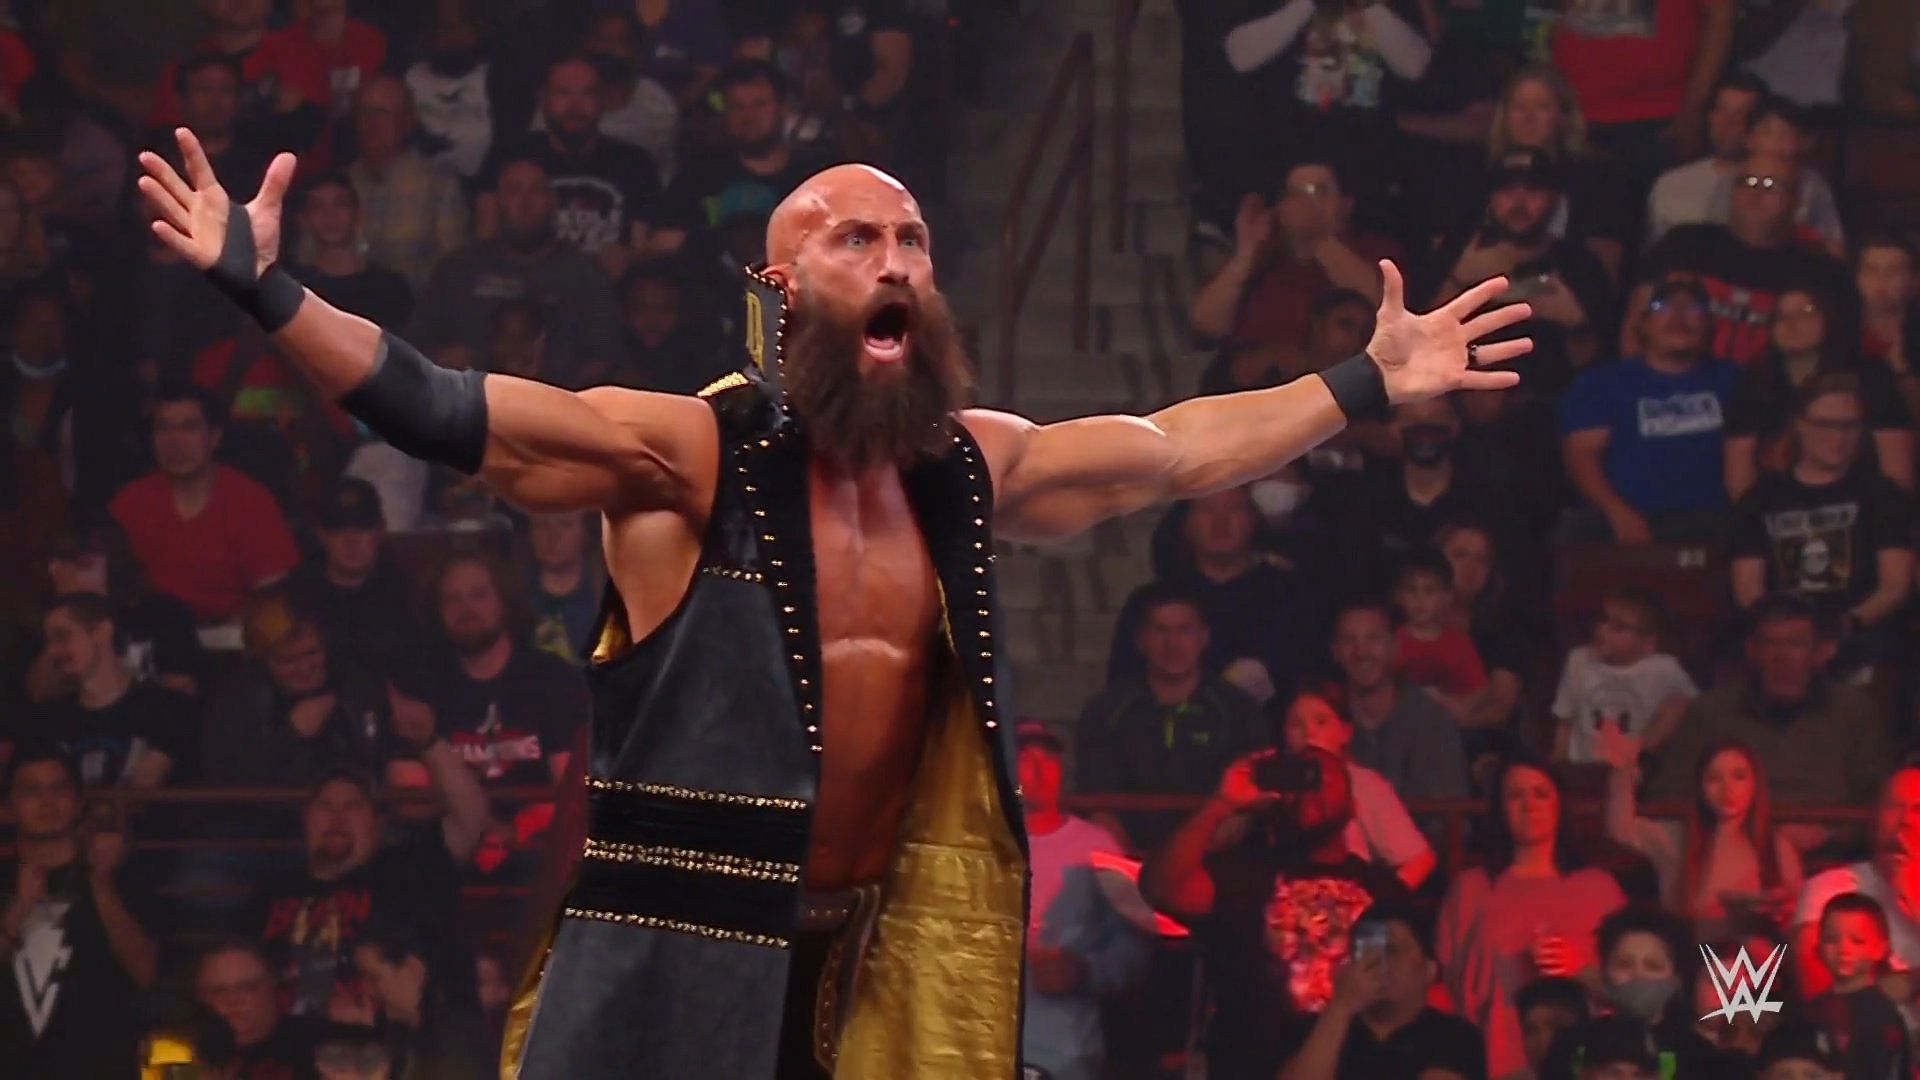 Ciampa currently has no match scheduled for SummerSlam 2022